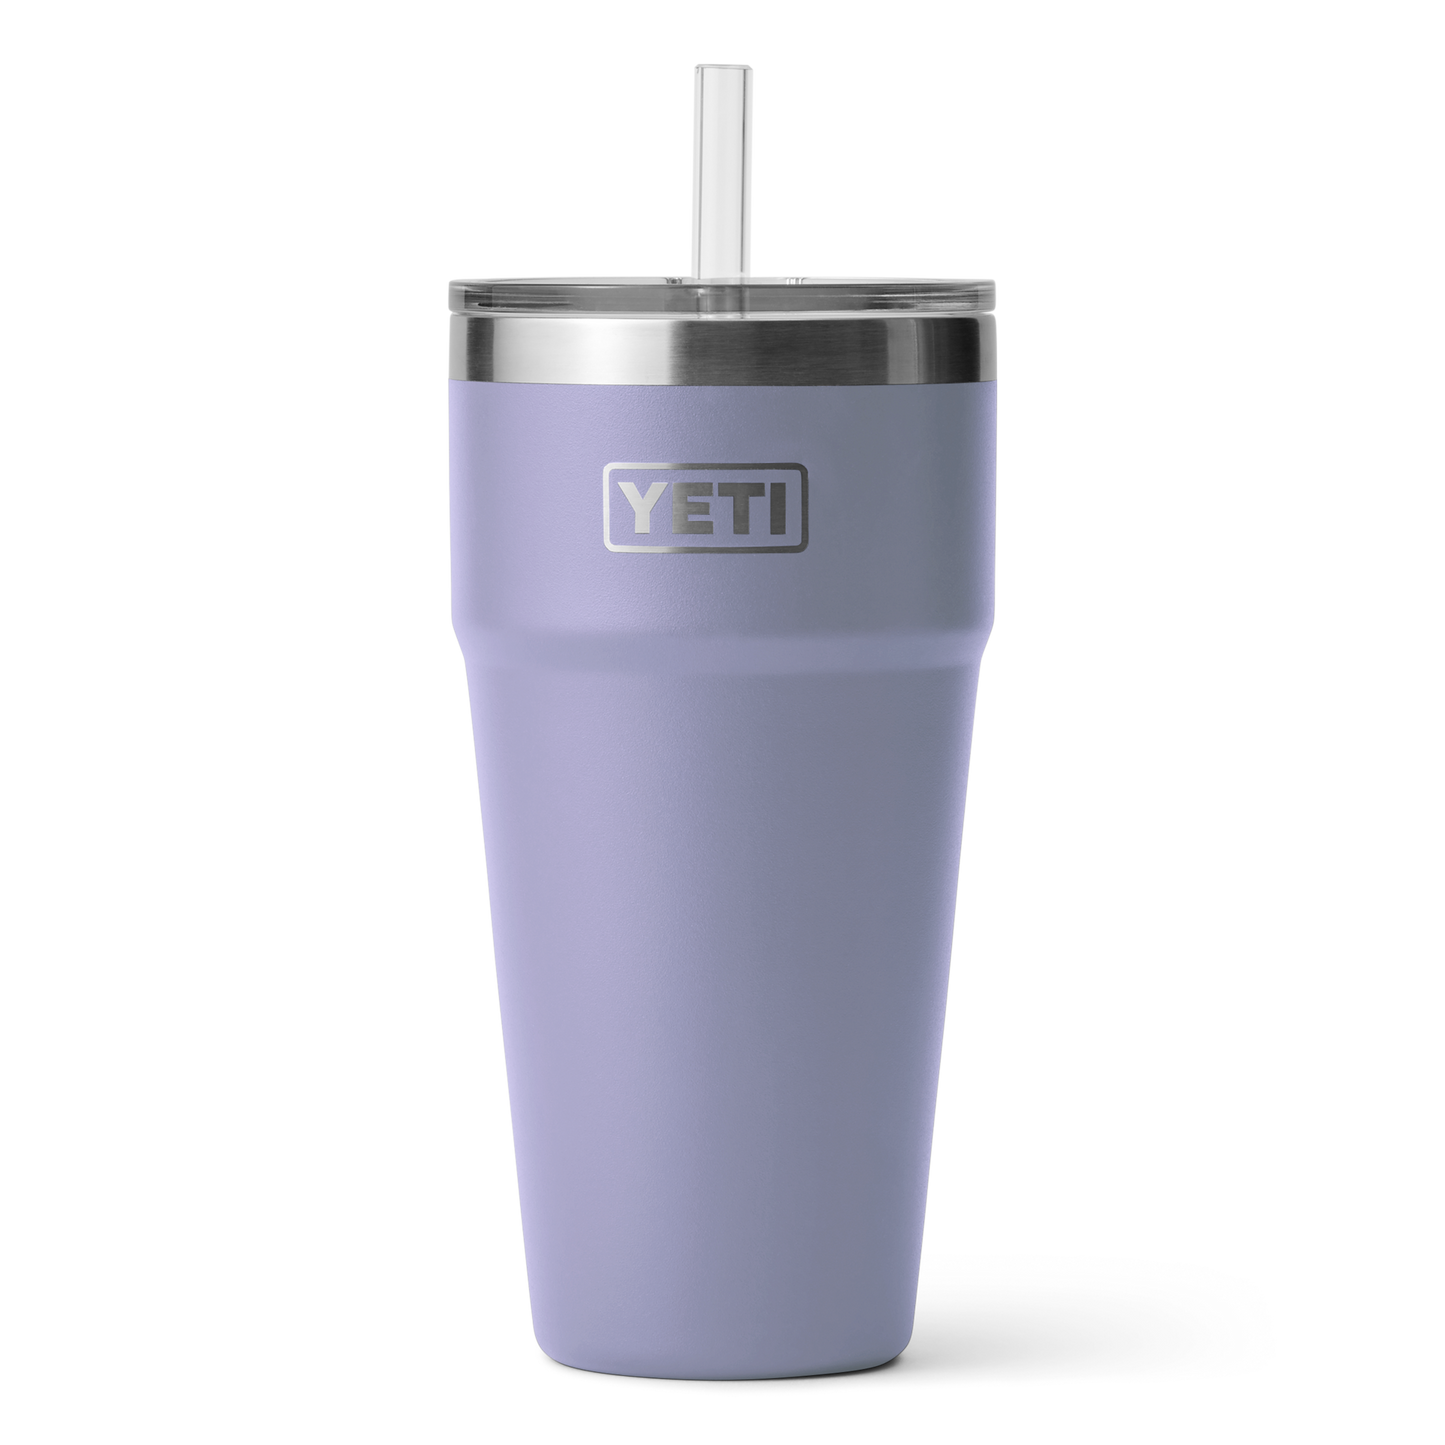 YETI Rambler 26 Oz. (769 ml) Stackable Cup with Straw Lid